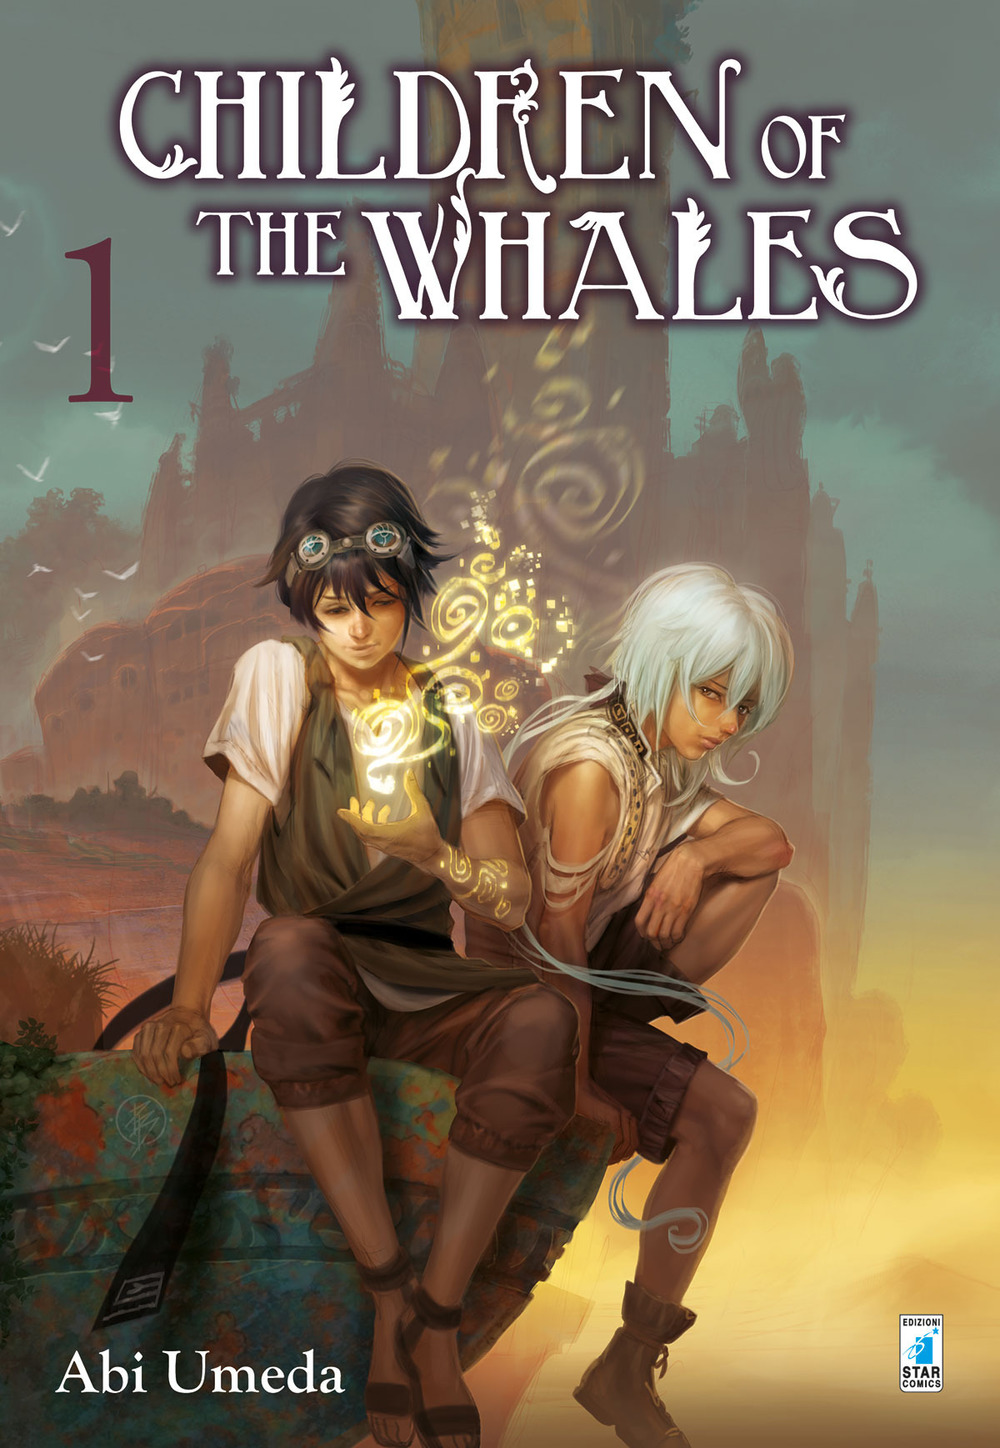 Children of the whales. Variant. Vol. 1